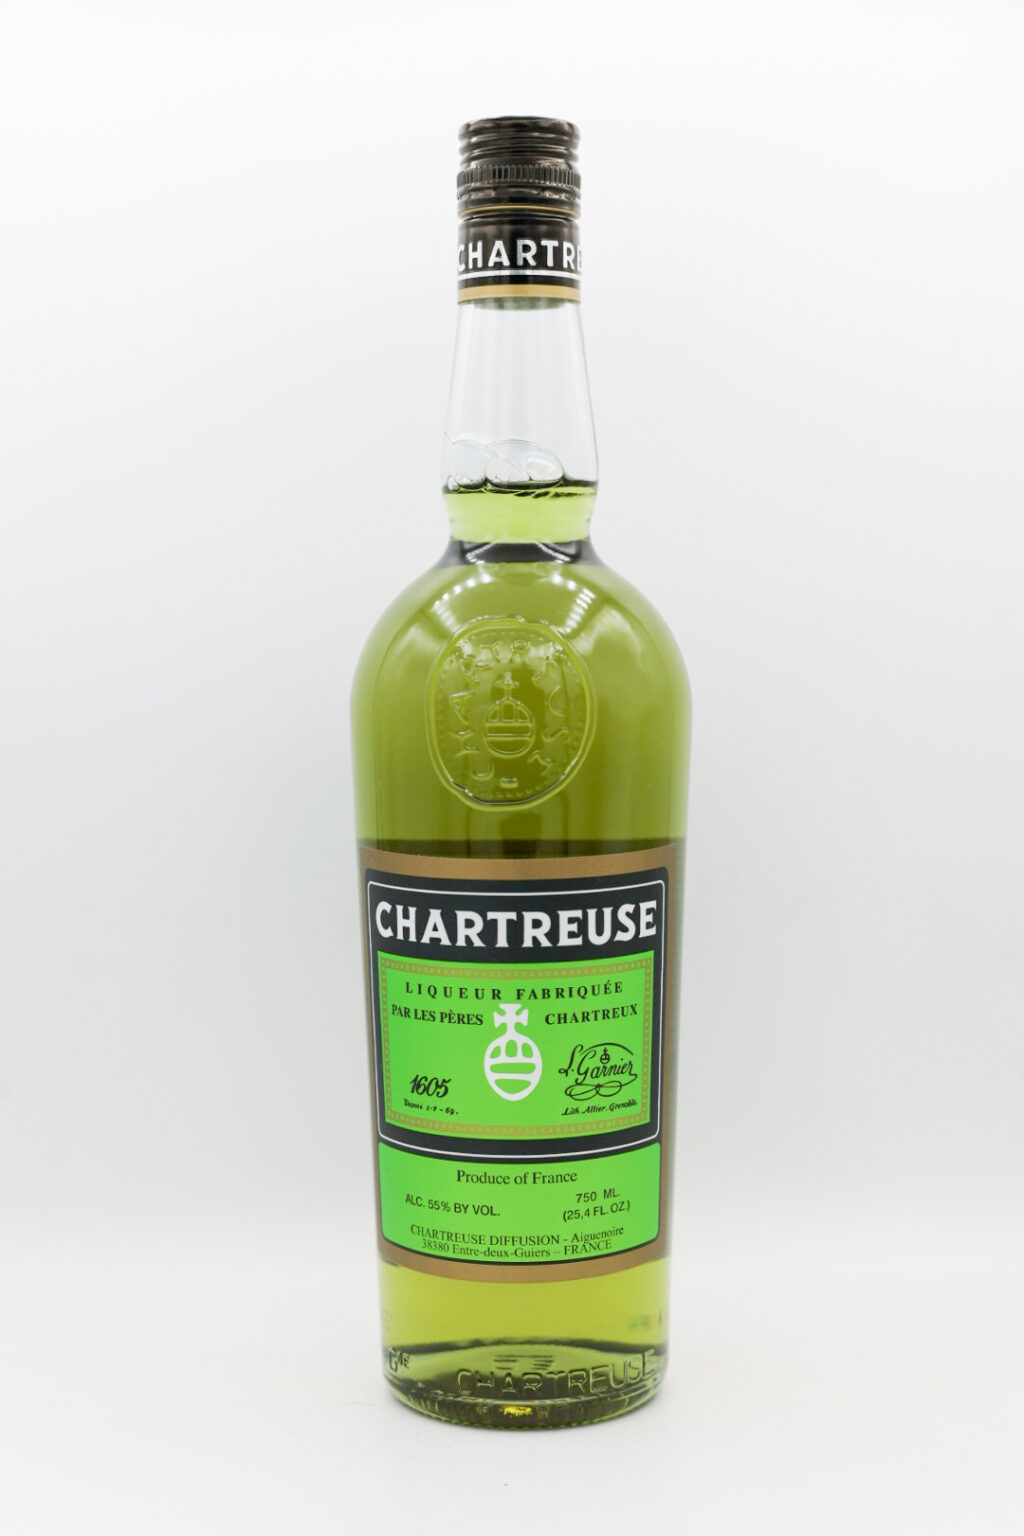 Chartreuse Green 750ml